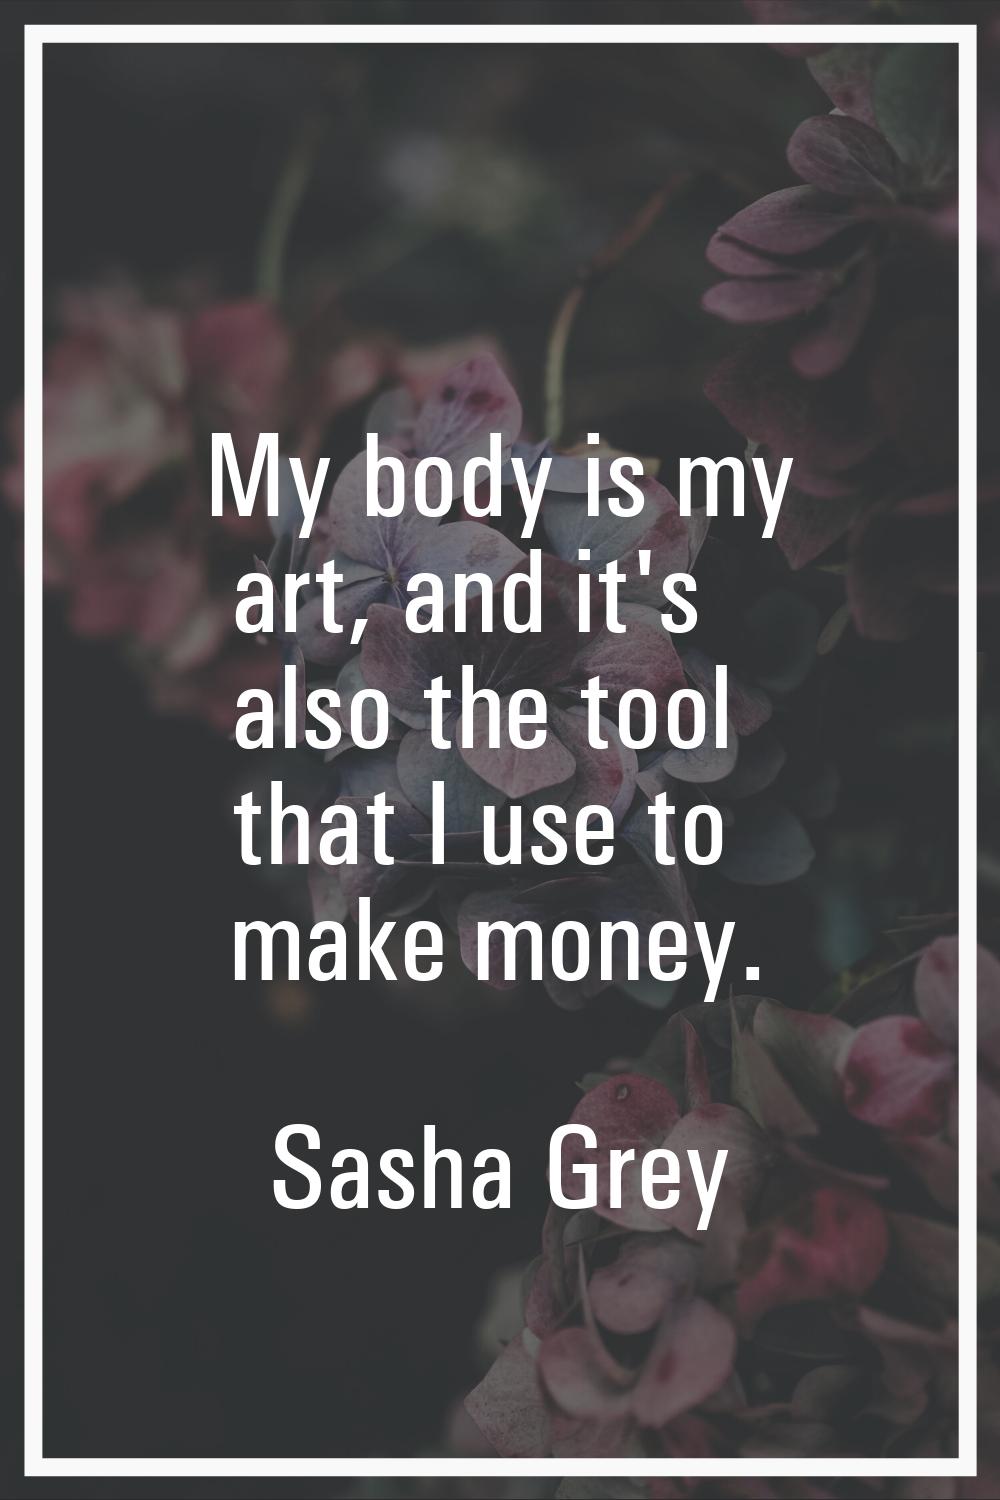 My body is my art, and it's also the tool that I use to make money.